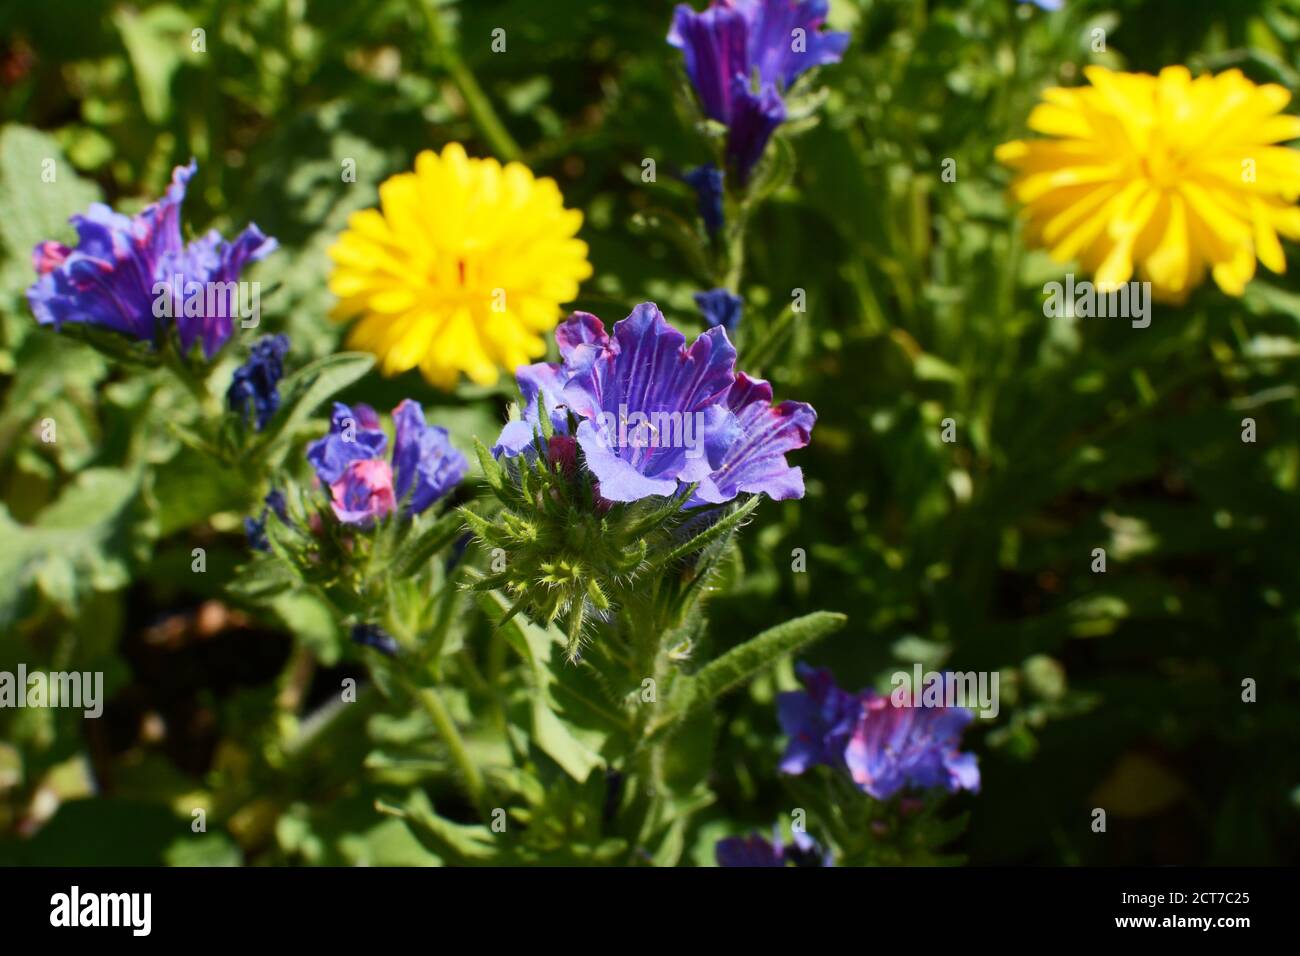 Viper's bugloss - wildflower with blue blooms, growing in a flower bed alongside yellow calendula Stock Photo